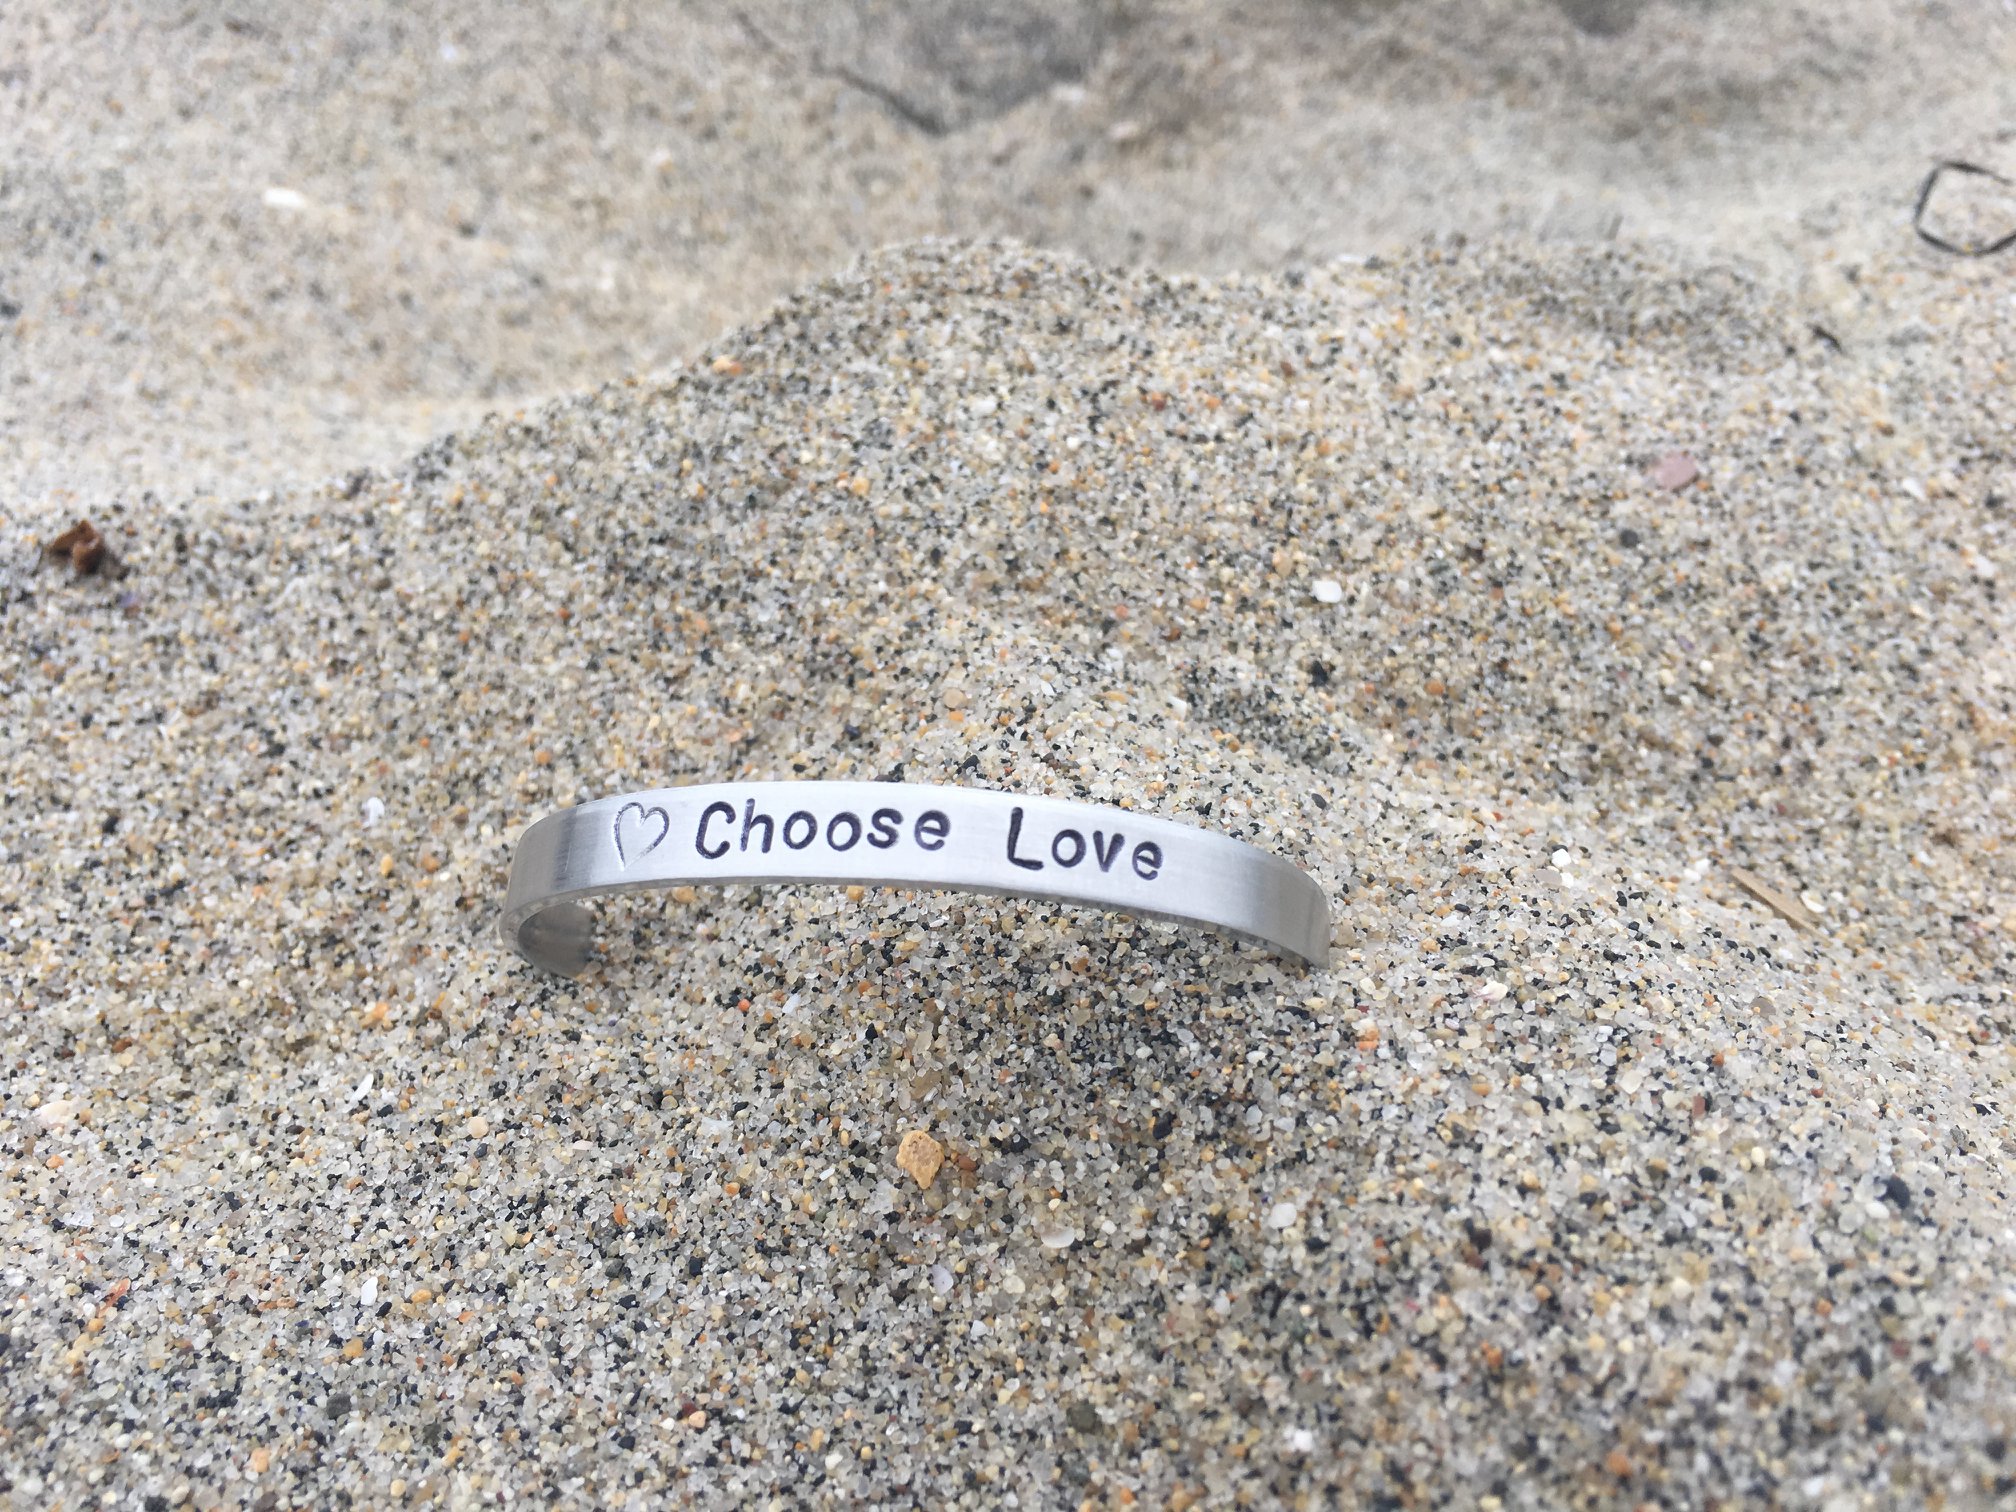 Live life by the Choose Love Formula